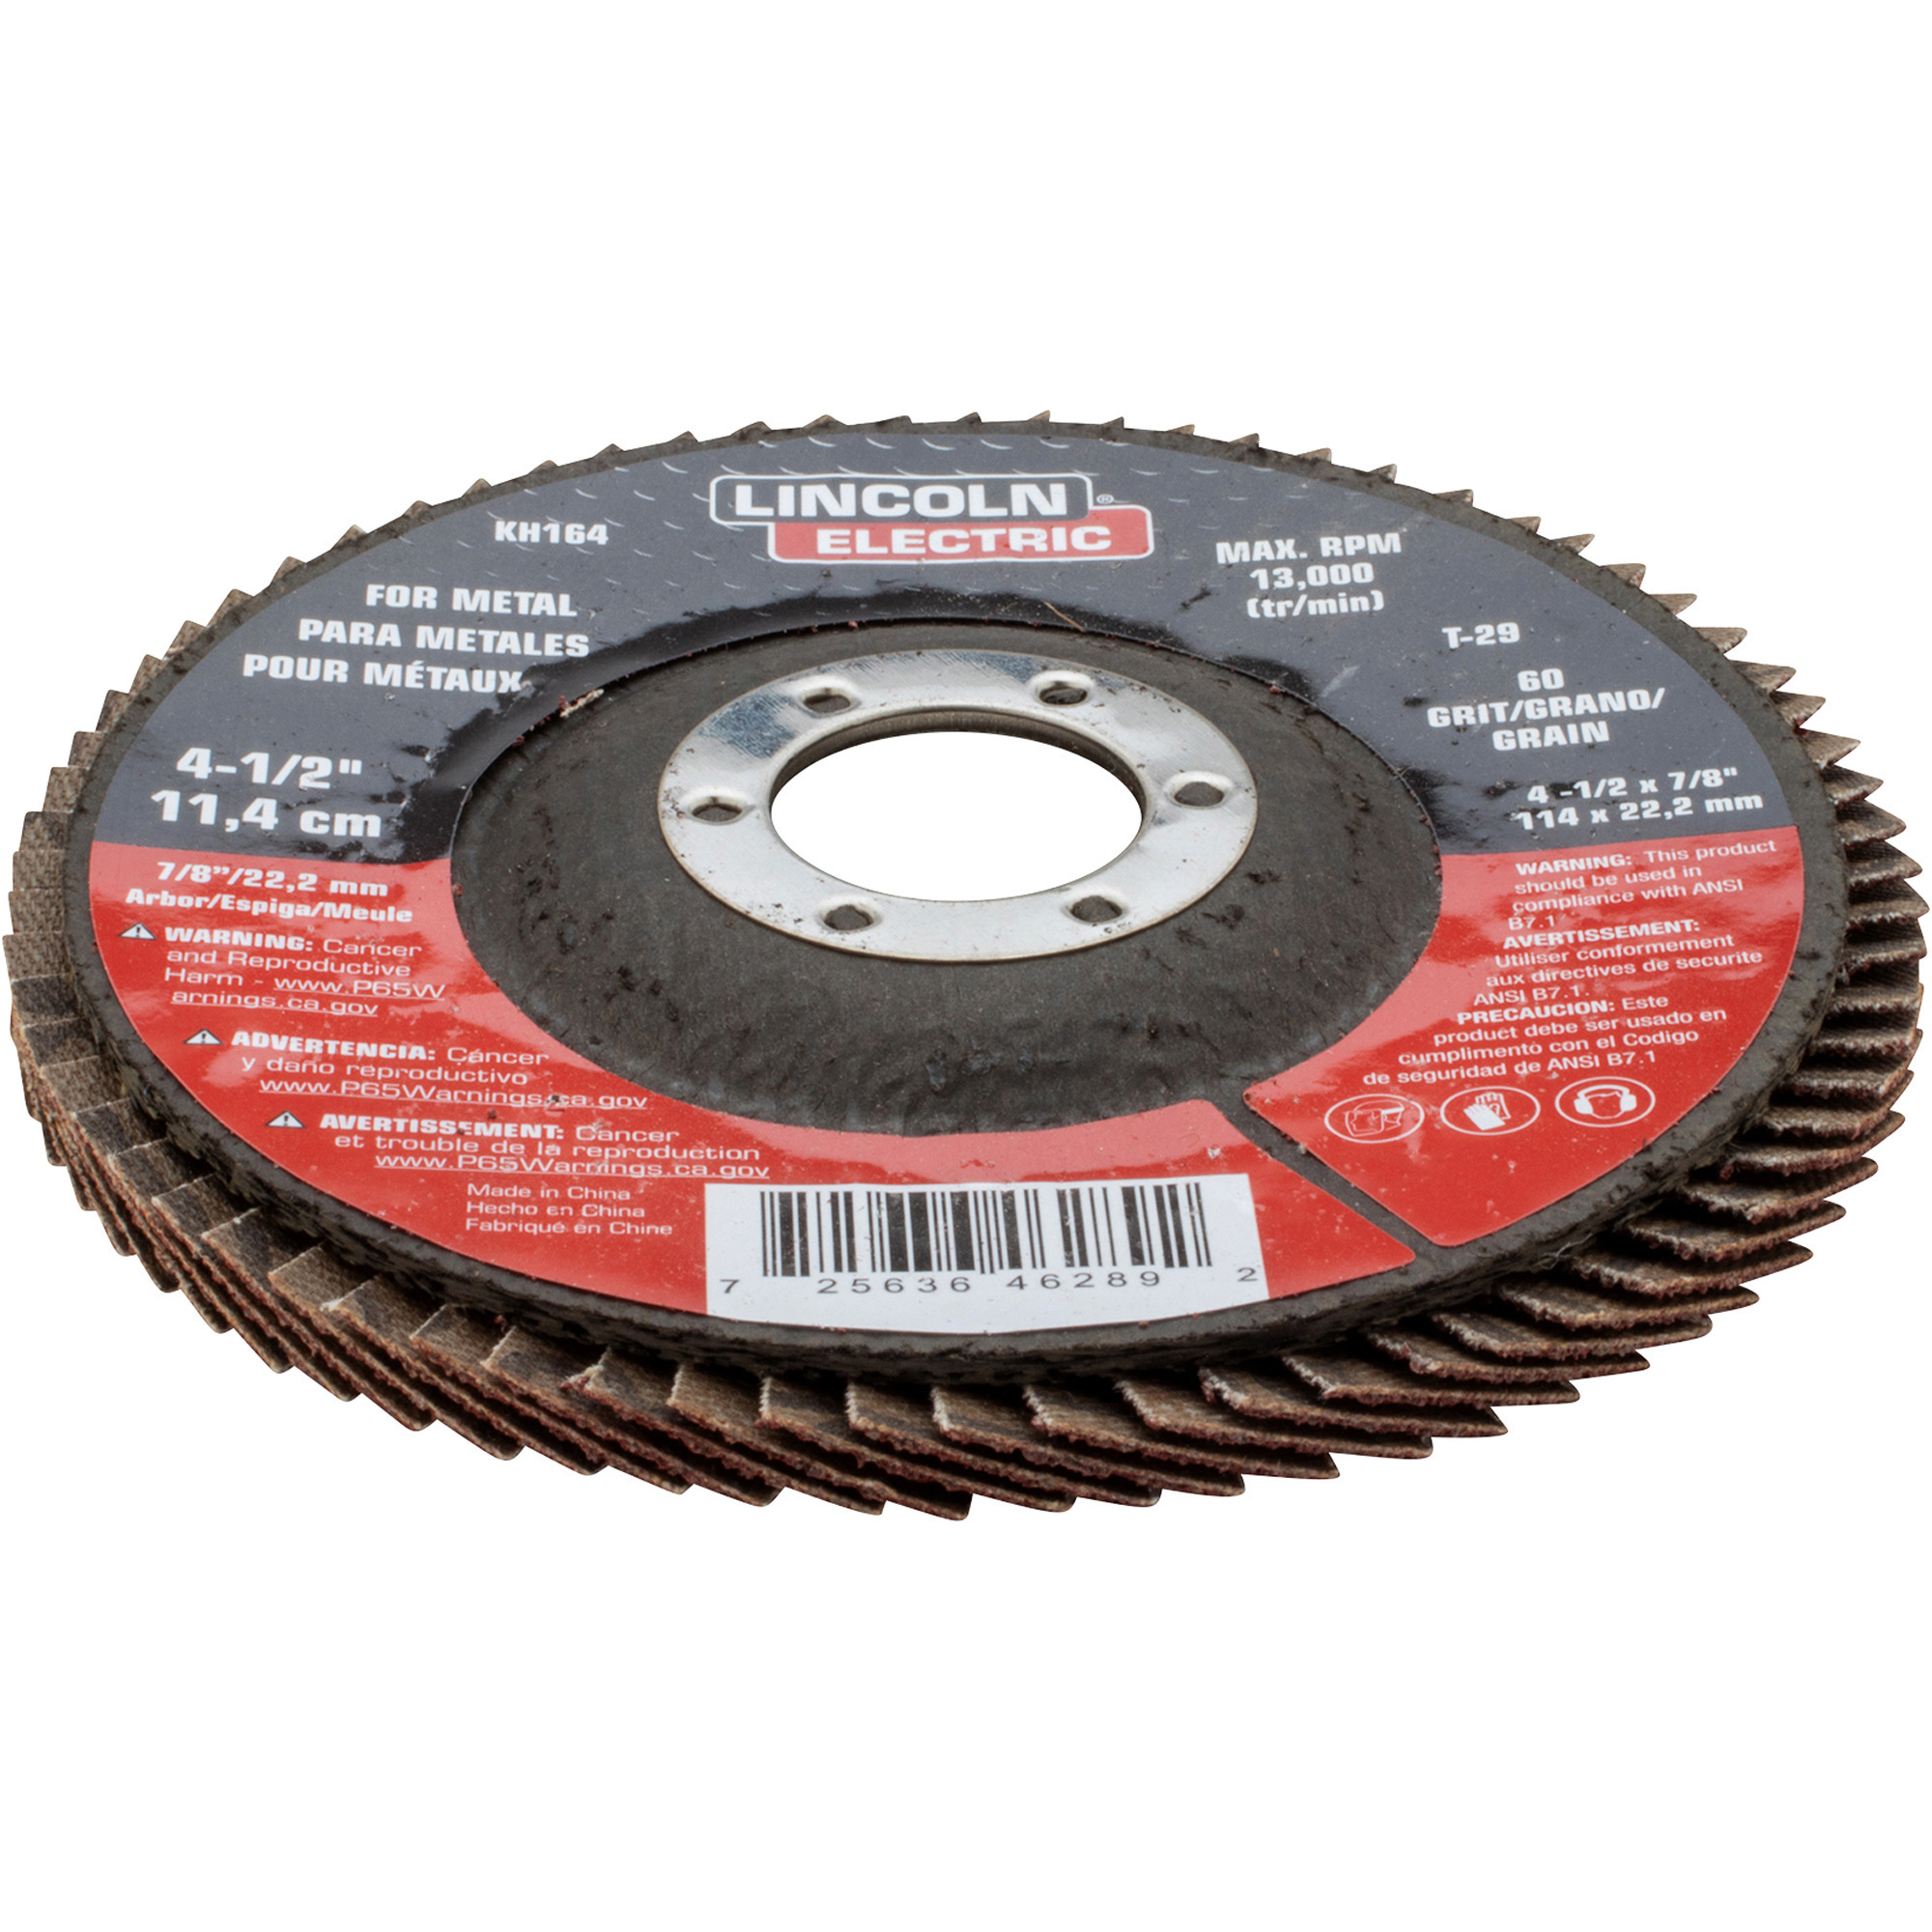 Lincoln Electric Grinding Flap Disc, 4.5in. Dia, 60 Grit, Model# KH164